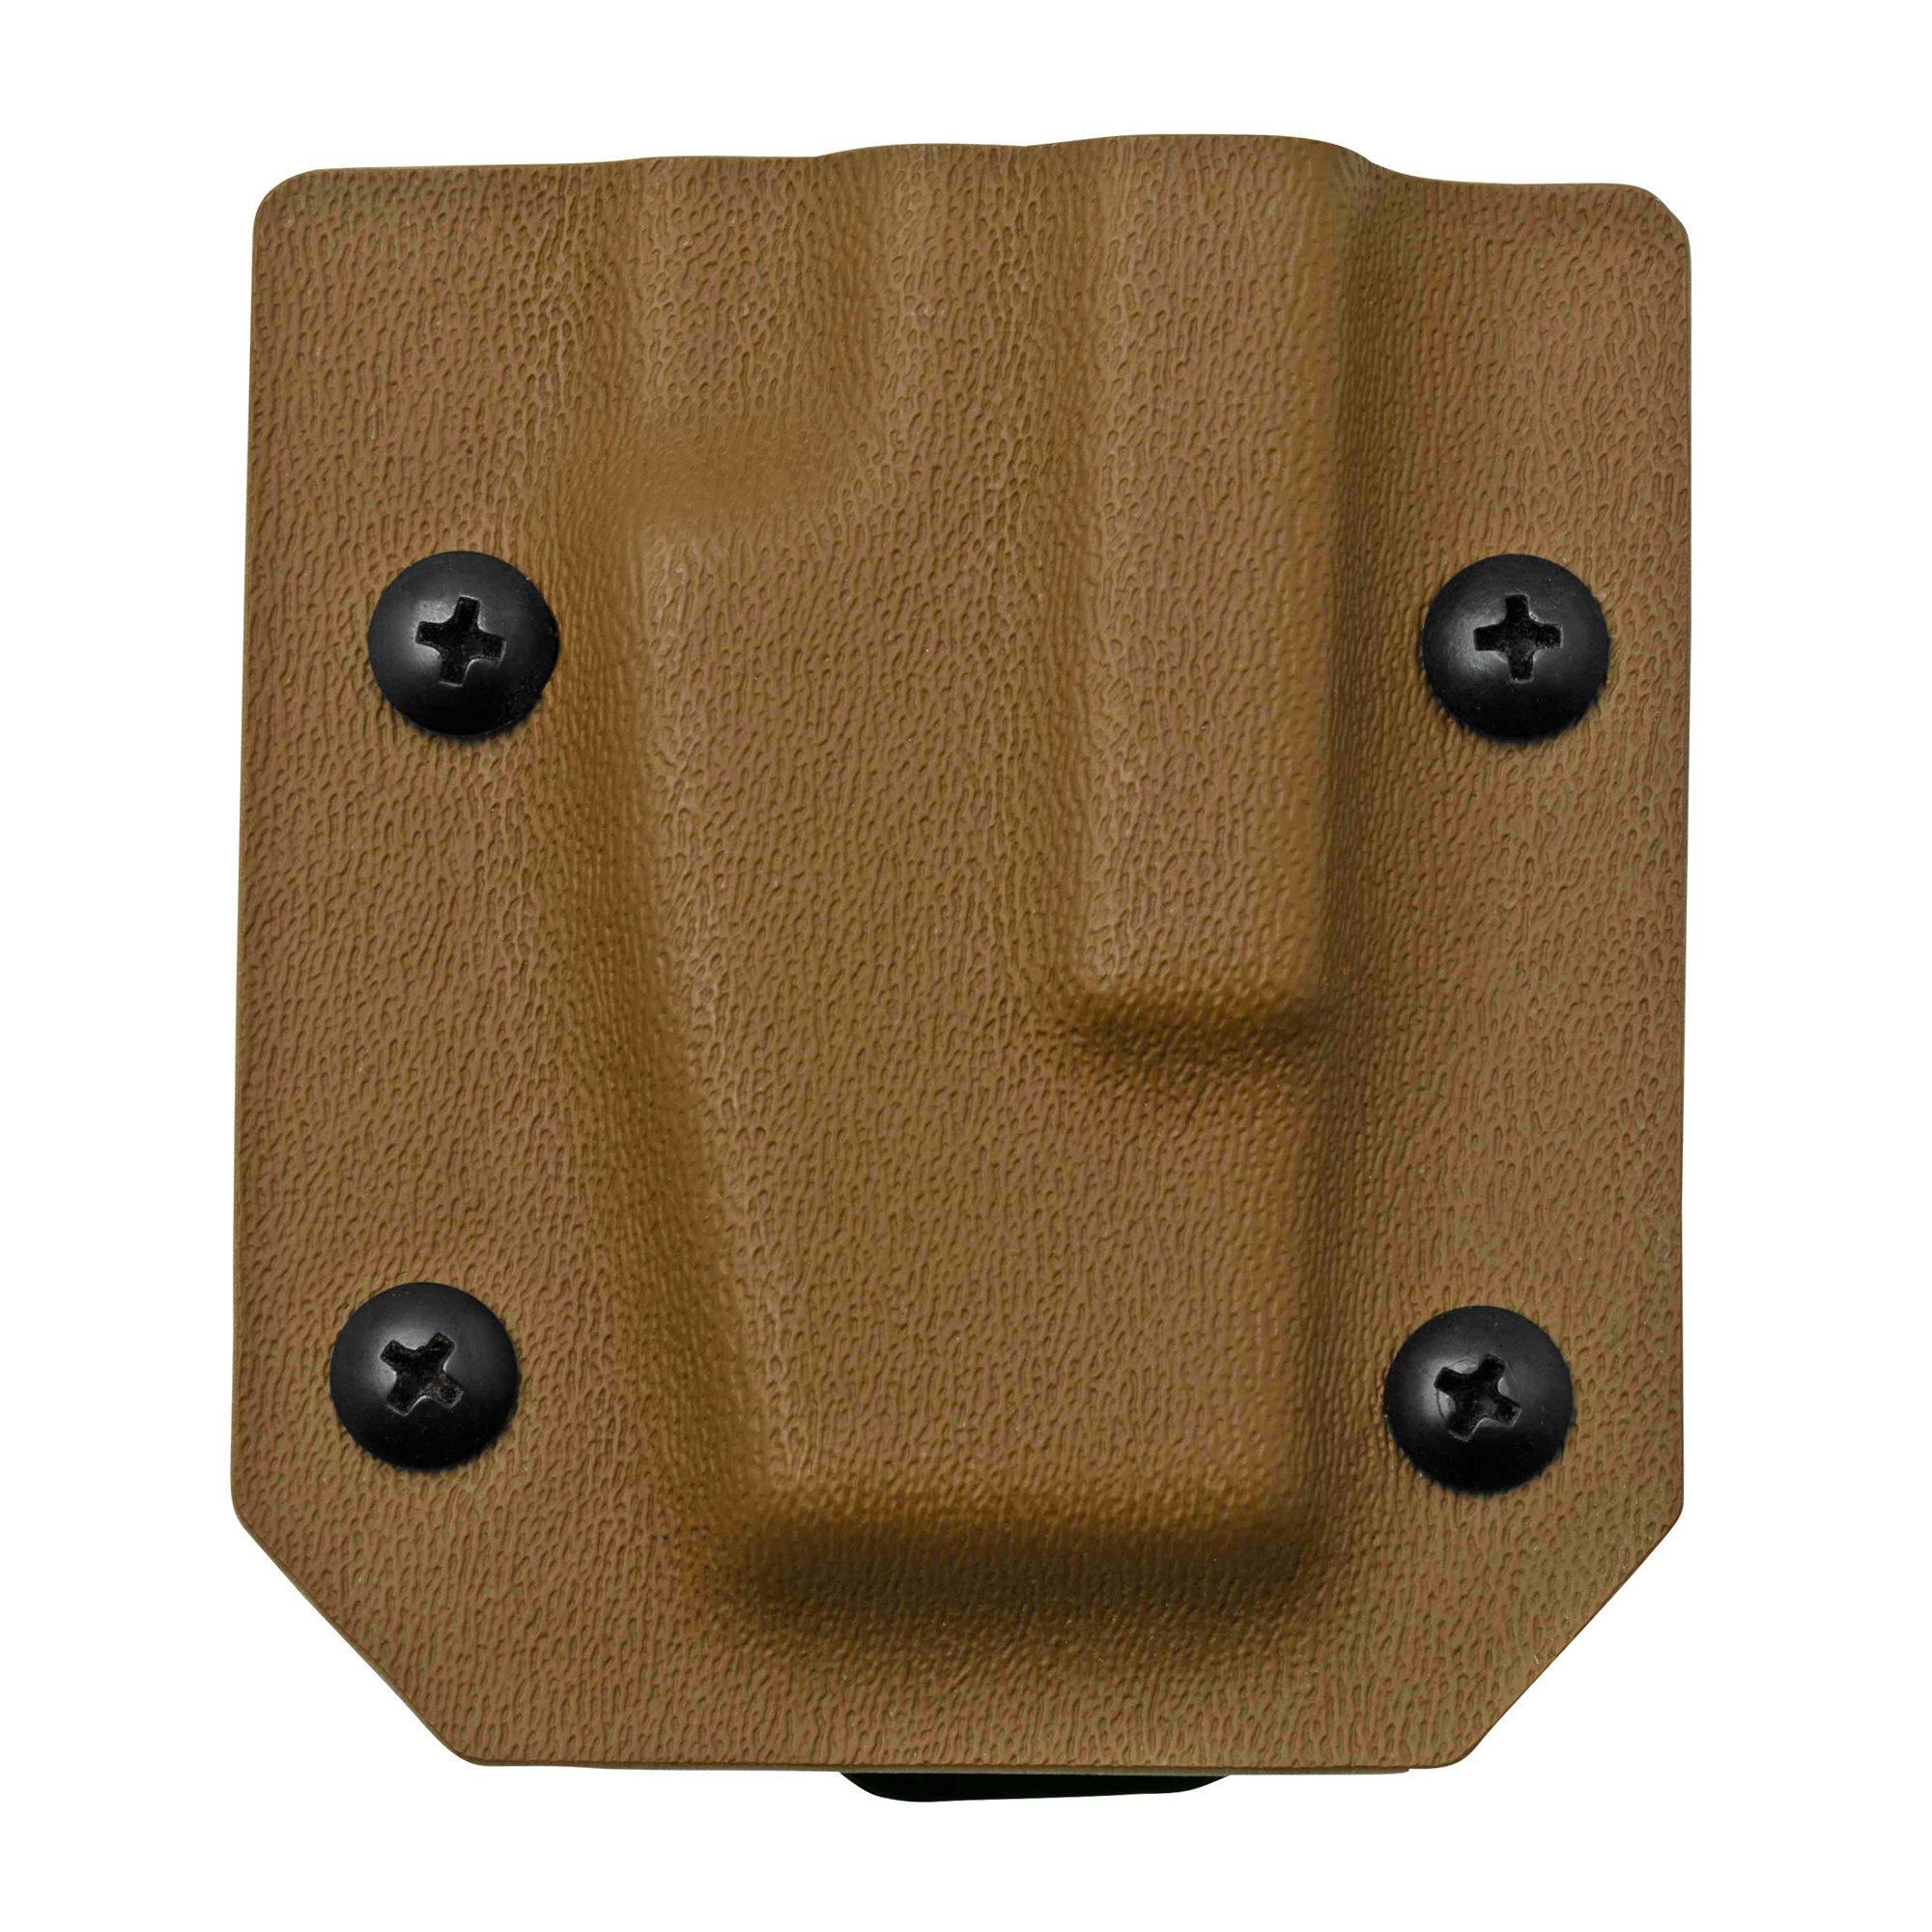 Clip & Carry Clip And Carry Kydex Sheath Buck 110, 112, Brown BUCK110-112-BRN riemholster